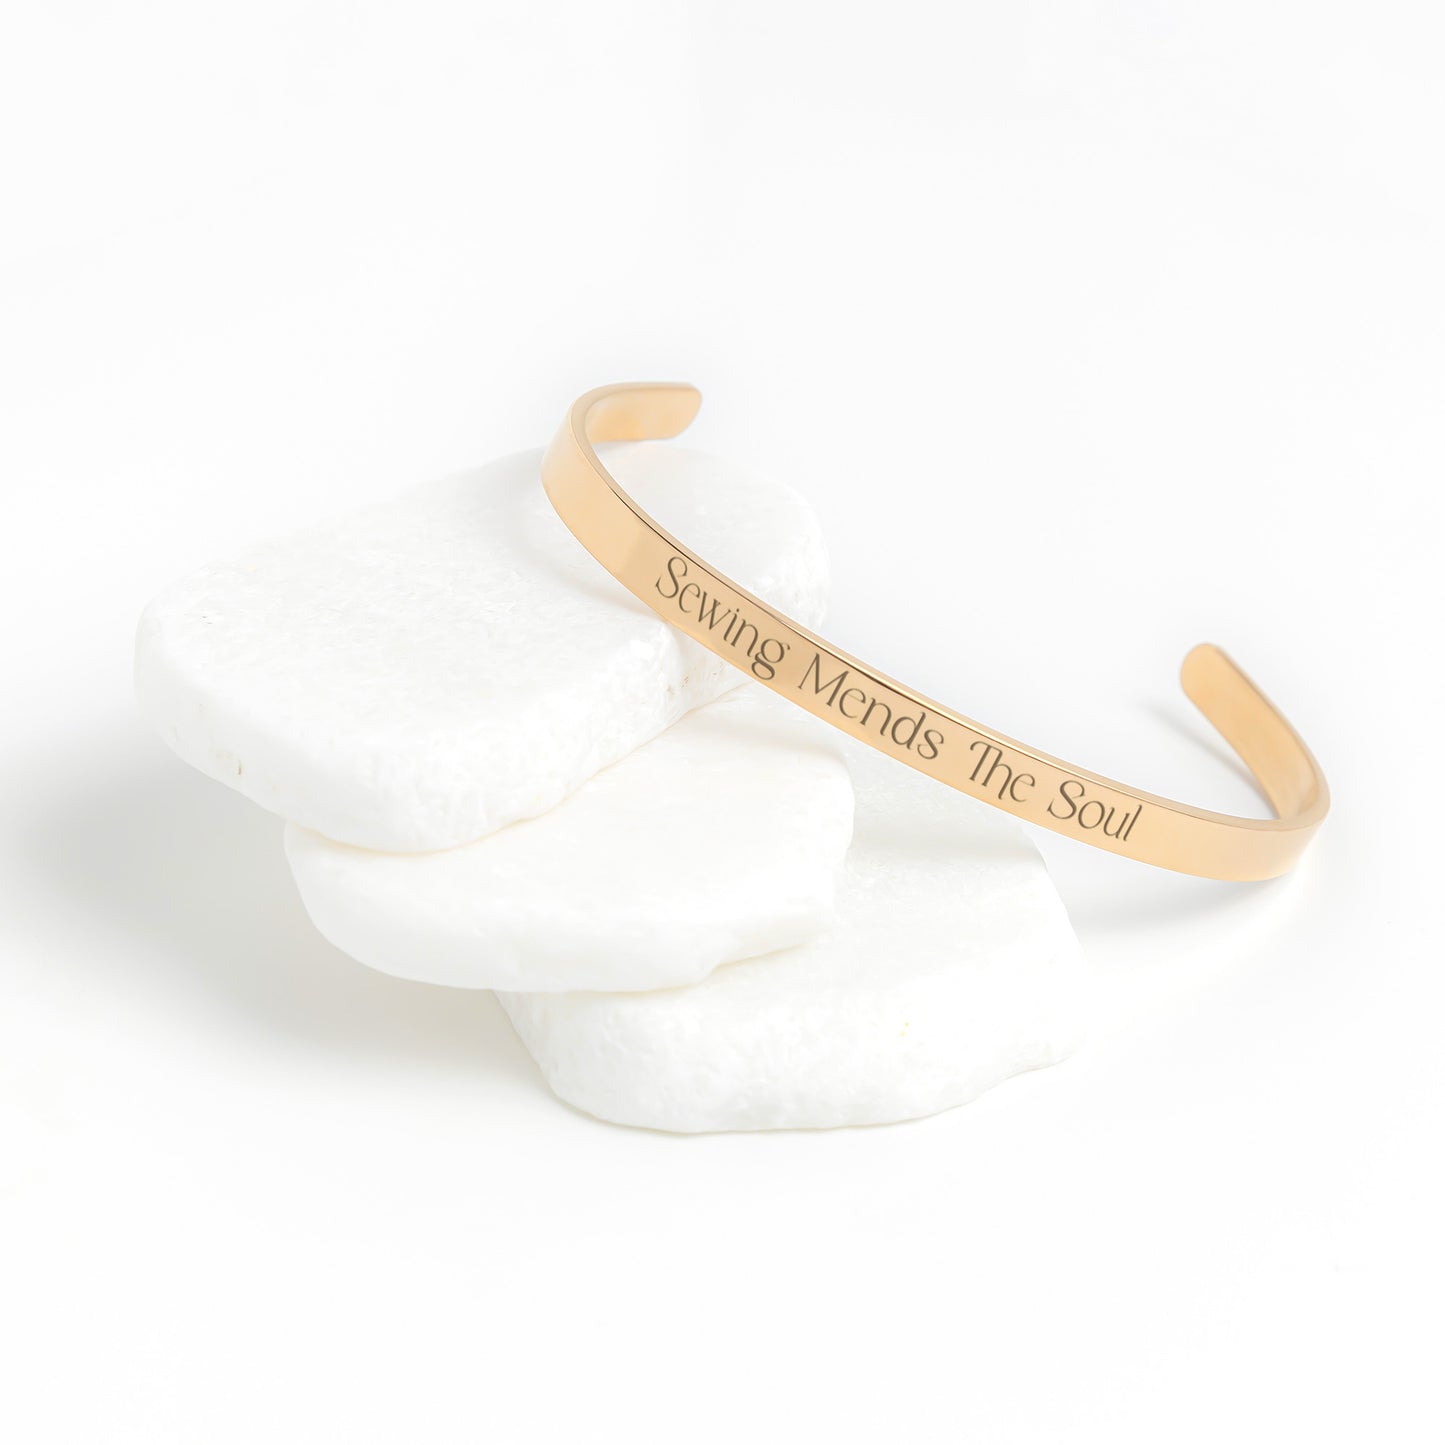 Sewing Mends The Soul Cuff Bracelet - FREE SHIPPING